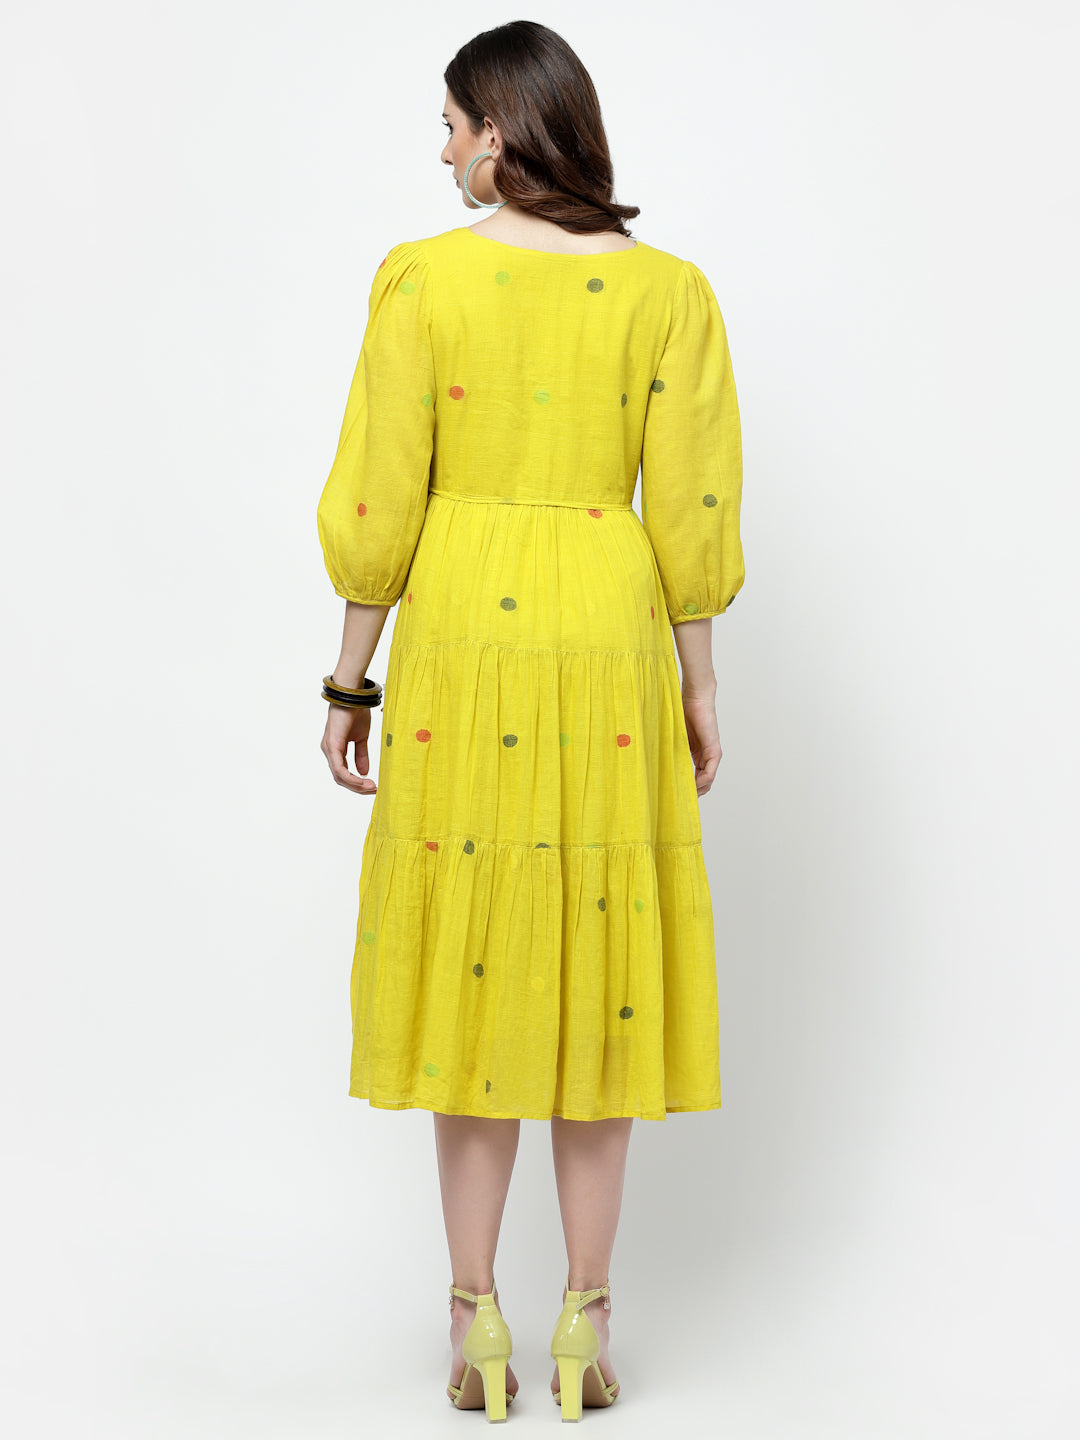 Terquois Polka Design Yellow Casual Dress with V-Neck,Gathers and Fashion Sleeves Dresses TERQUOIS   